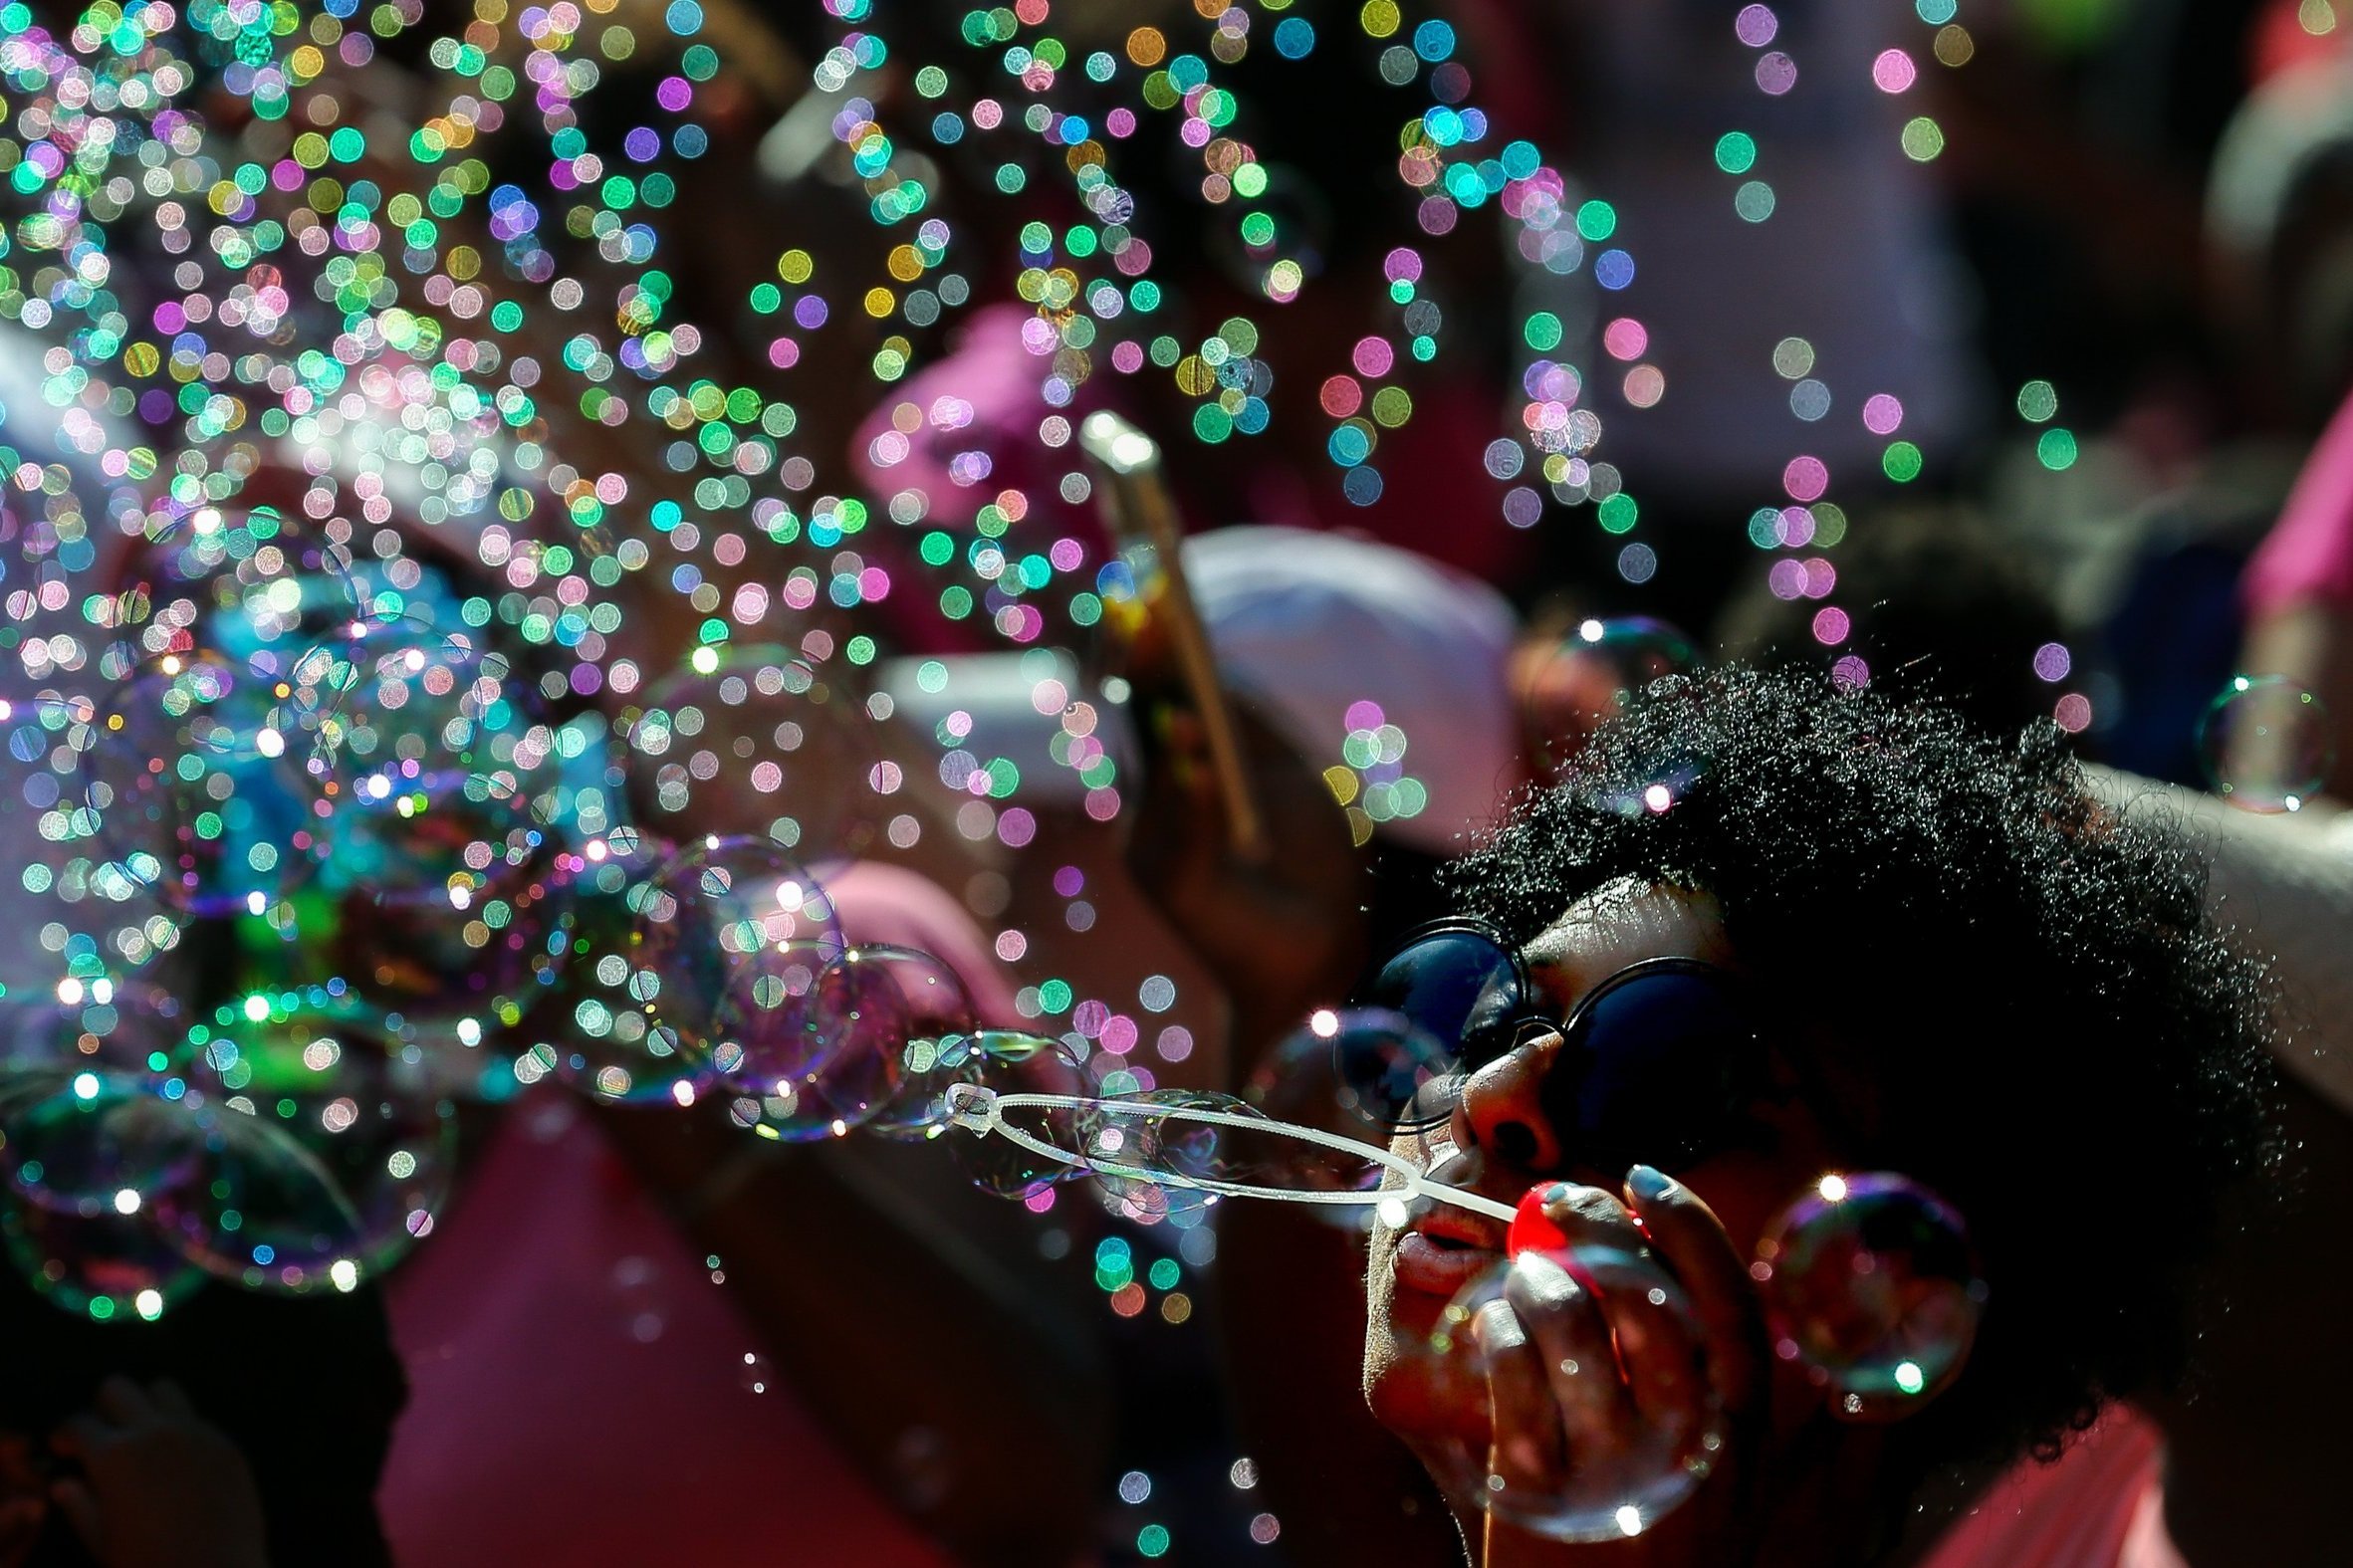  Trinity Newman blows bubbles along with thousands of people outside City Hall in honor of Maleah Davis, the four-year-old girl who went missing in early May and whose body was found tossed along an Arkansas roadside last week, on Sunday, June 9, 201